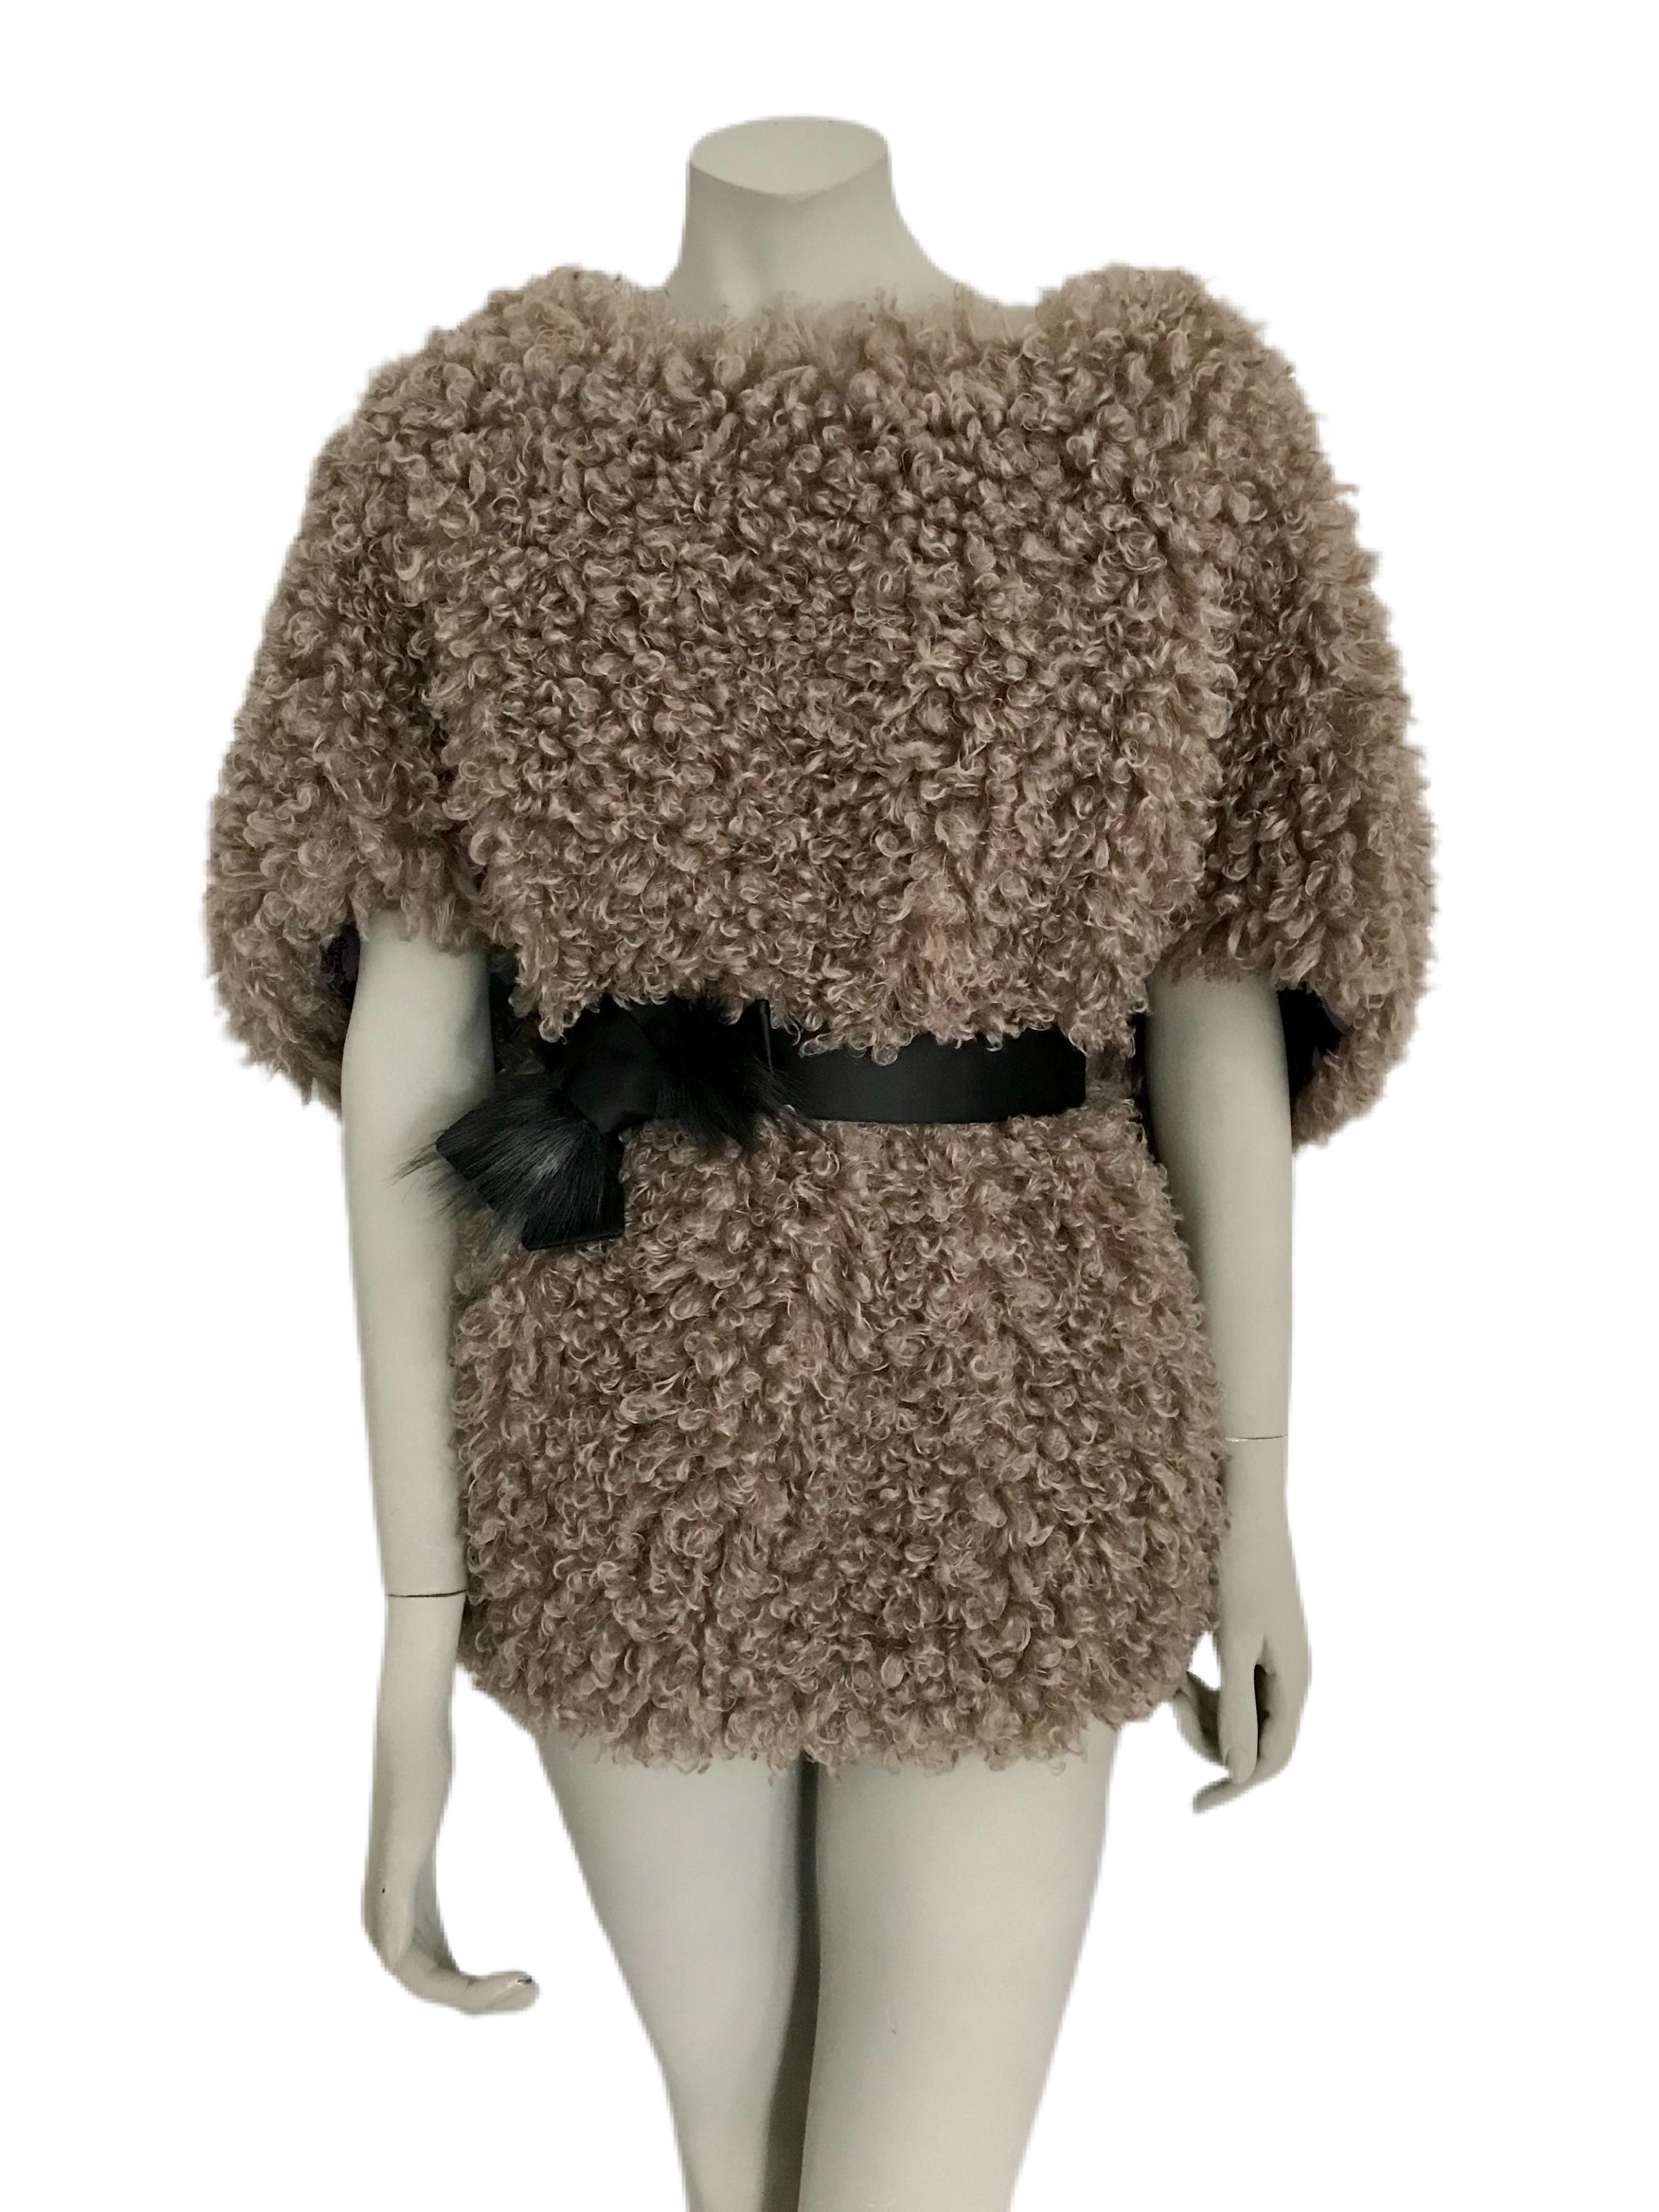 The Pelush faux fur reversible top is a one of a kind exclusive piece. Featuring a striking silk charmeuse fabric in a bold floral print on one side, and a soft curly boucle' faux fur in a soft mushroom color on the opposite side. Extremely